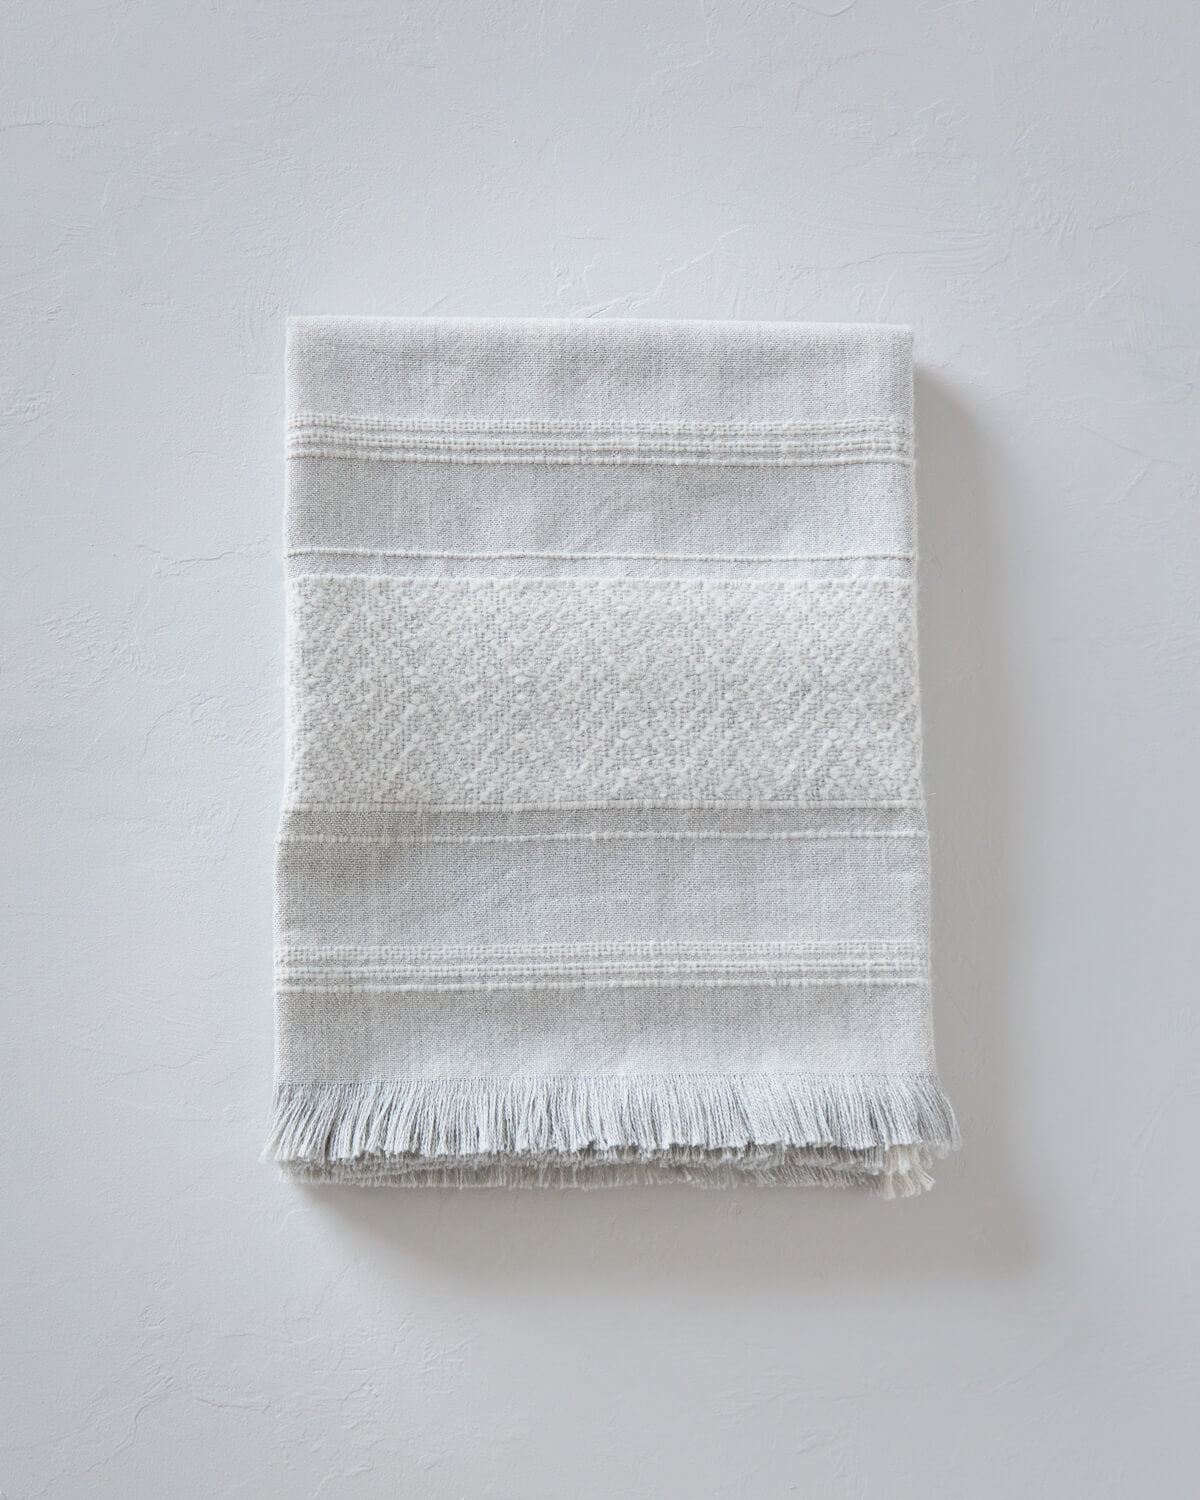 
                  
                    La Marea baby alpaca throw blanket folded with textured white stripes and light gray base for luxury gifts.
                  
                